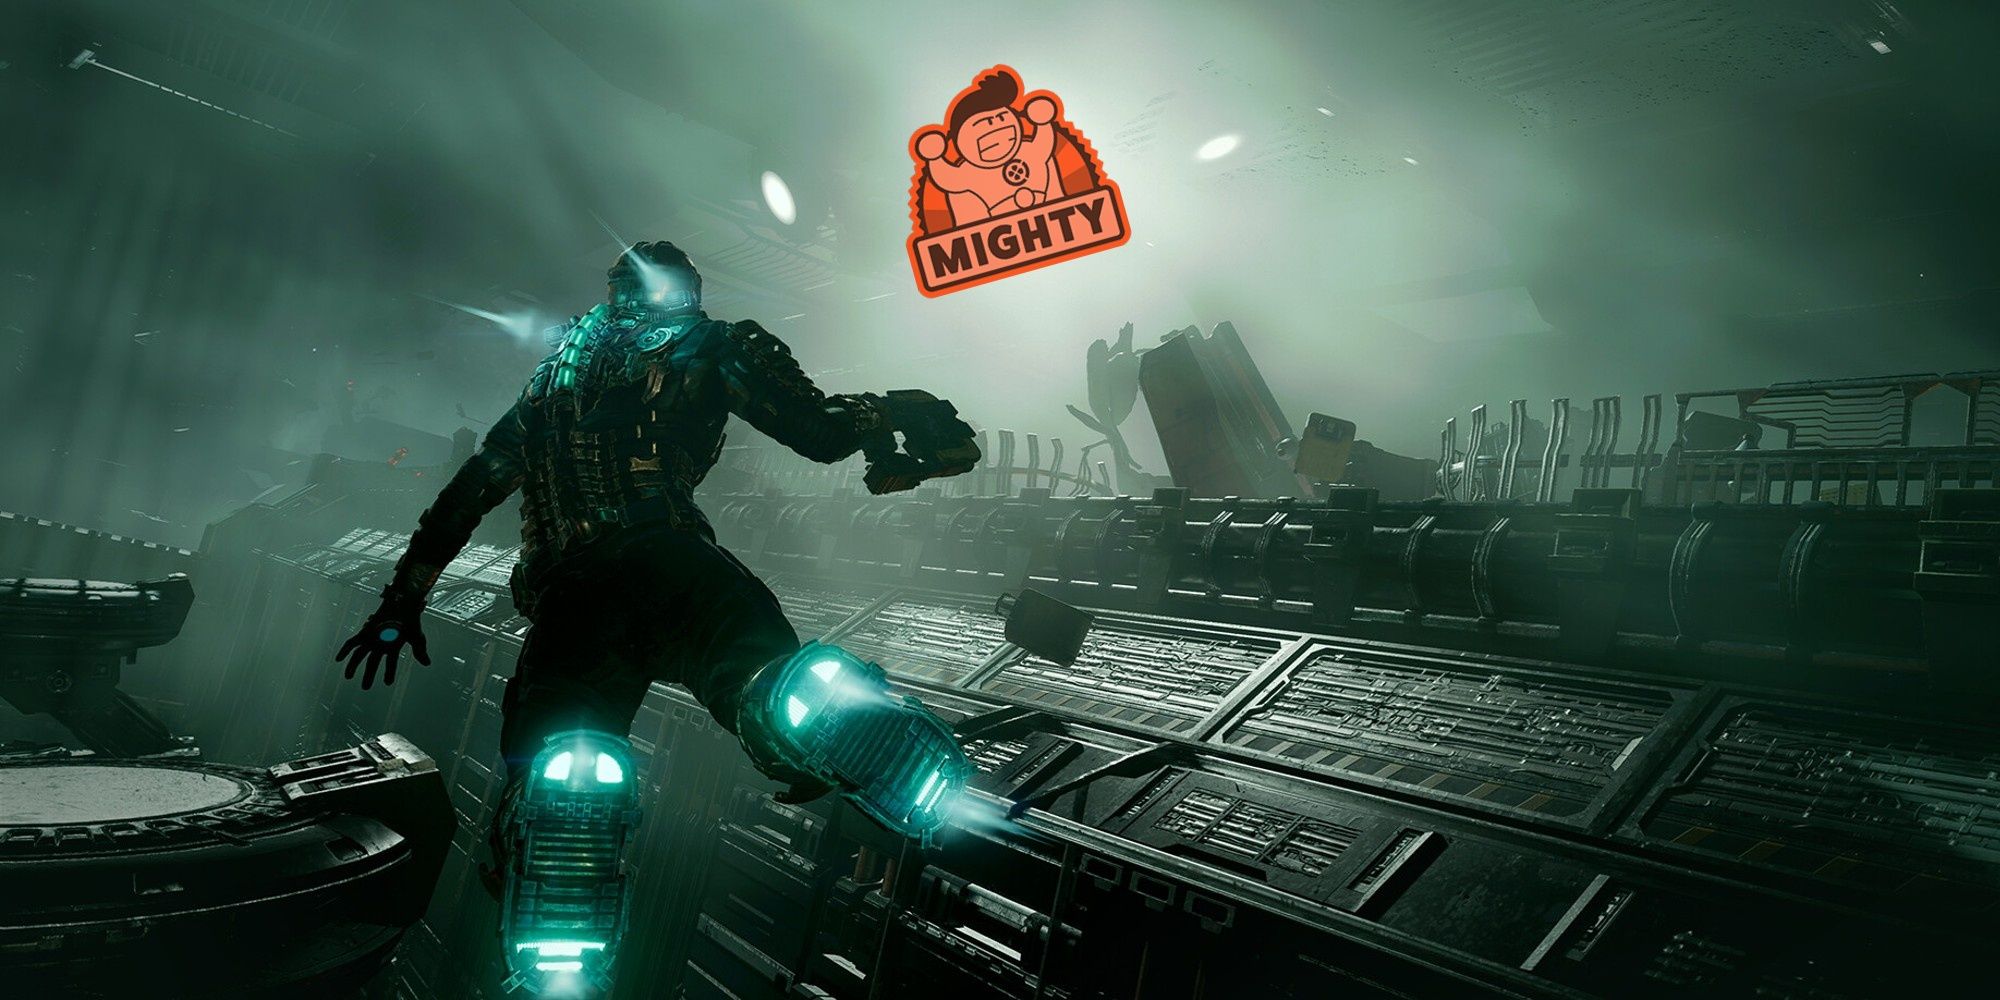 Dead Space Remake Isaac Clarke Is Floating Towards 'Mighty' Logo From OpenCritic